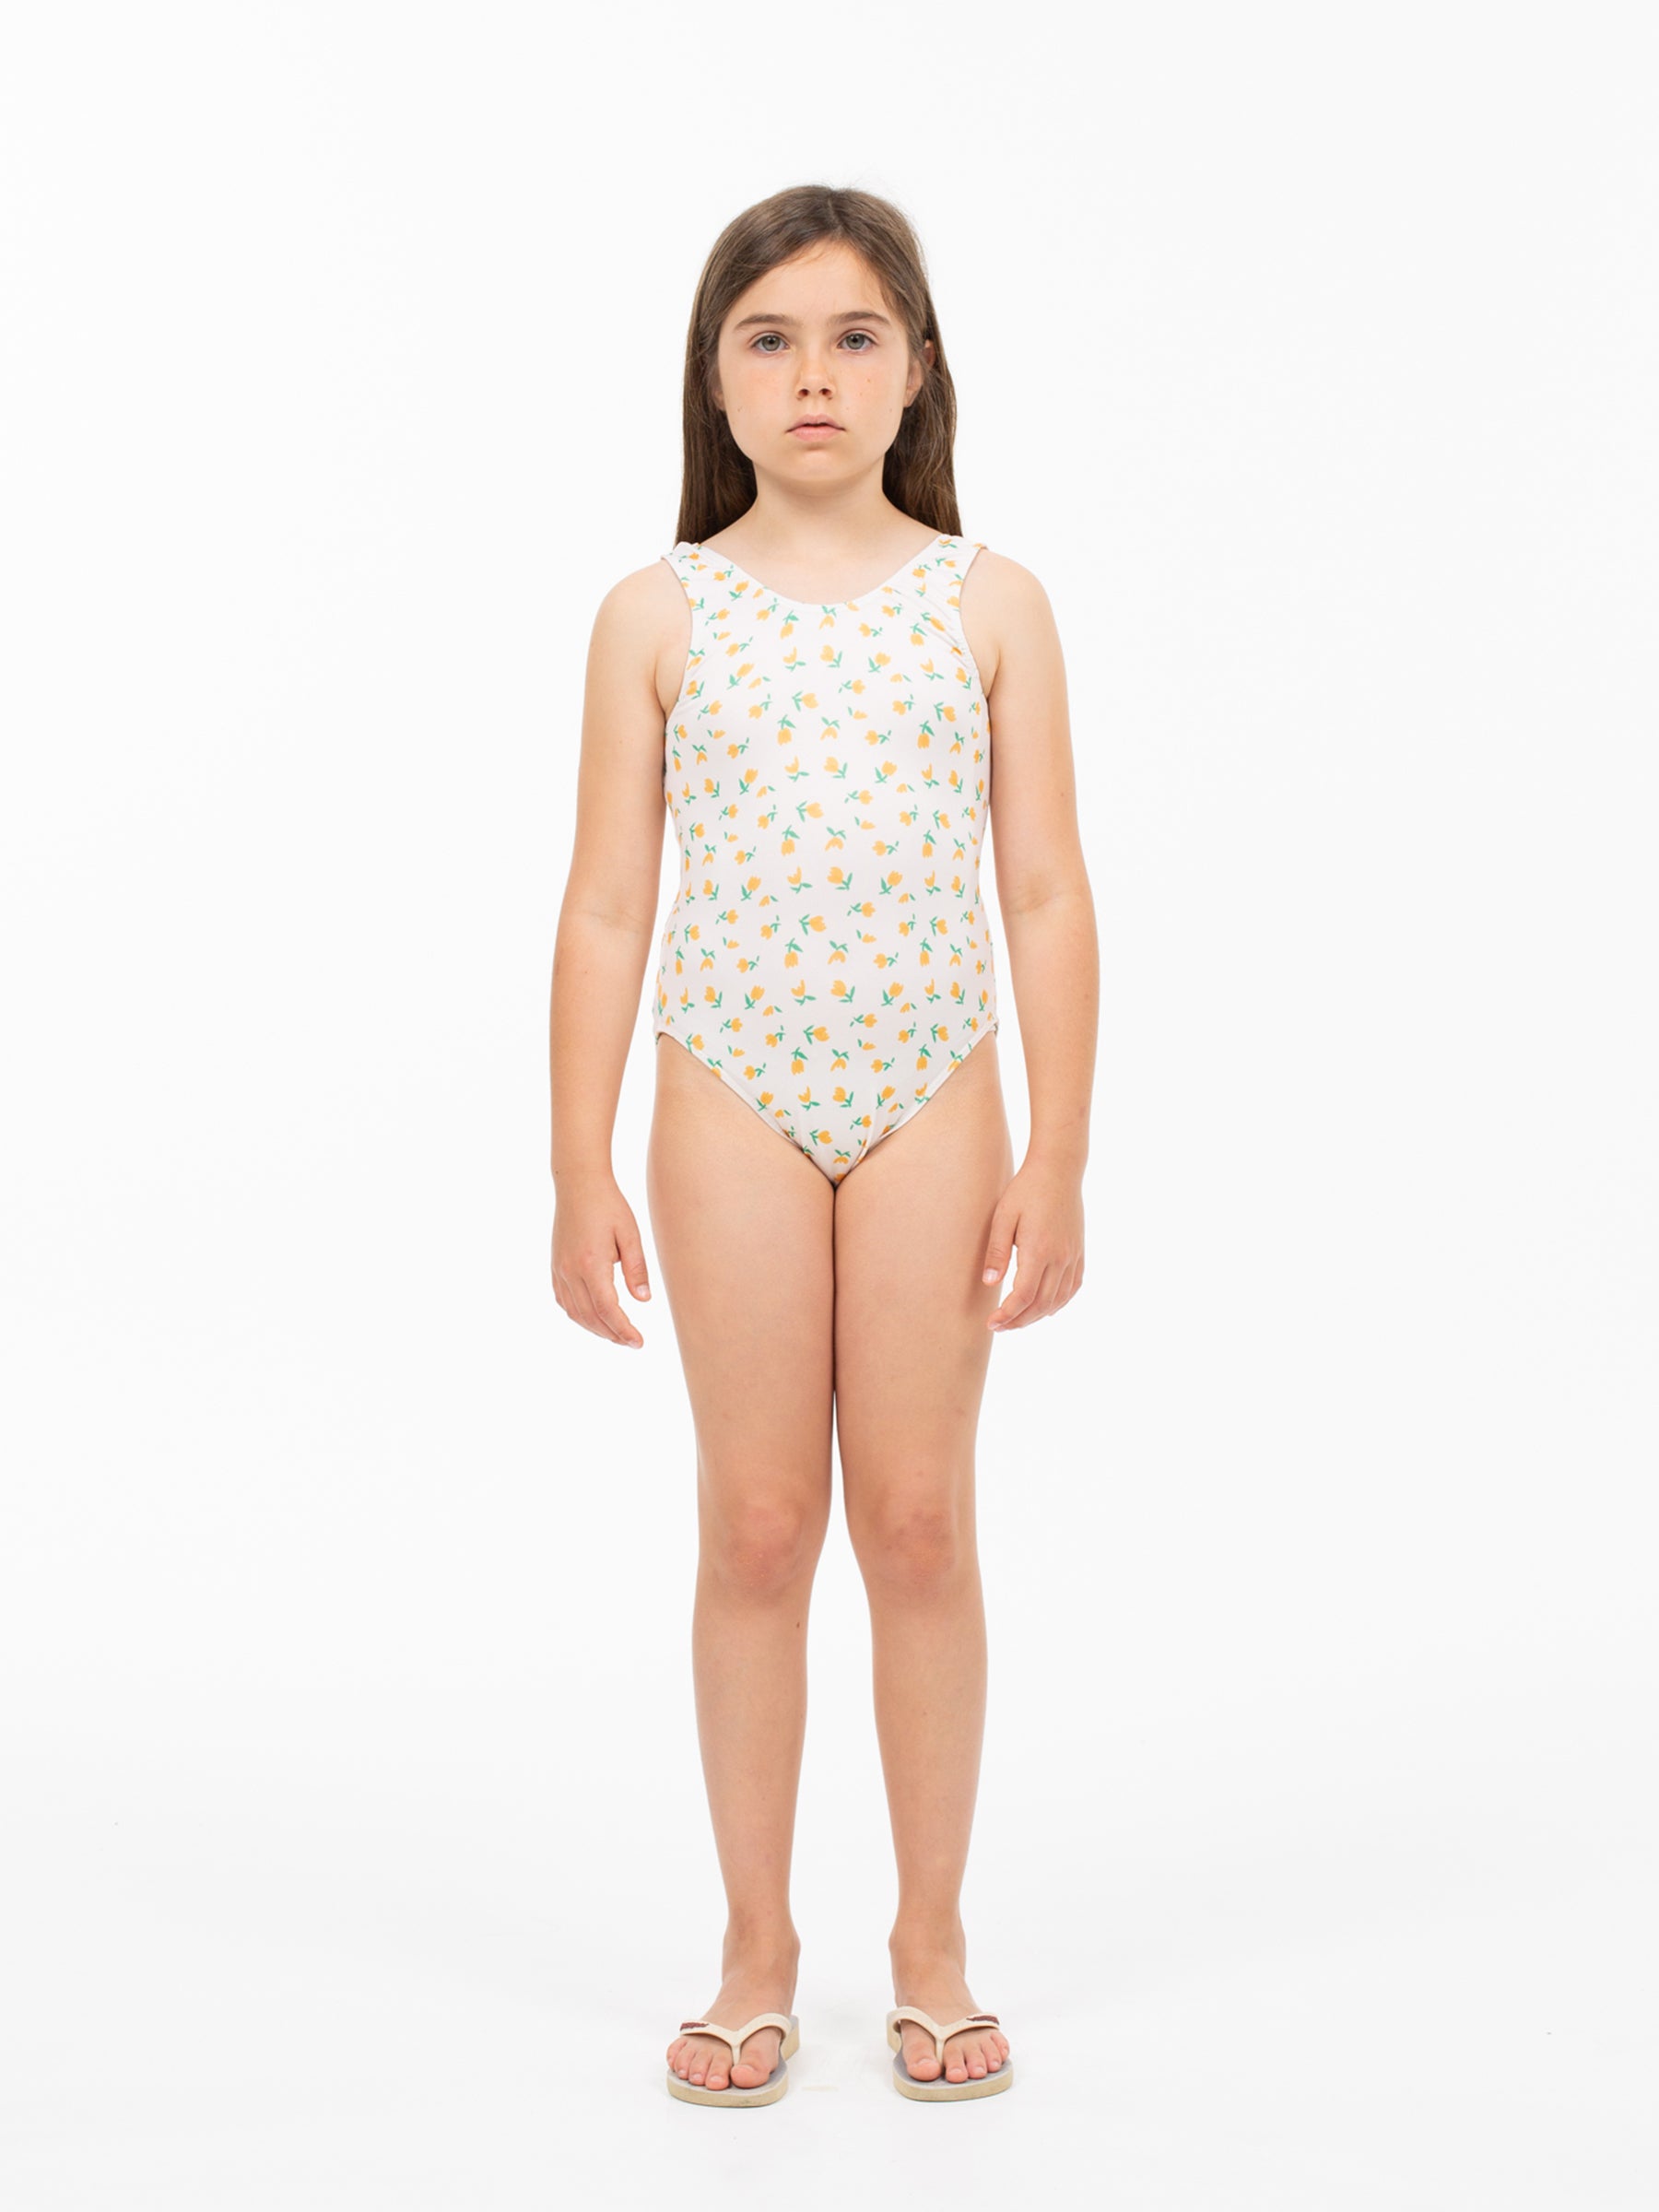 Wander and Wonder - swimsuit - yellow buds